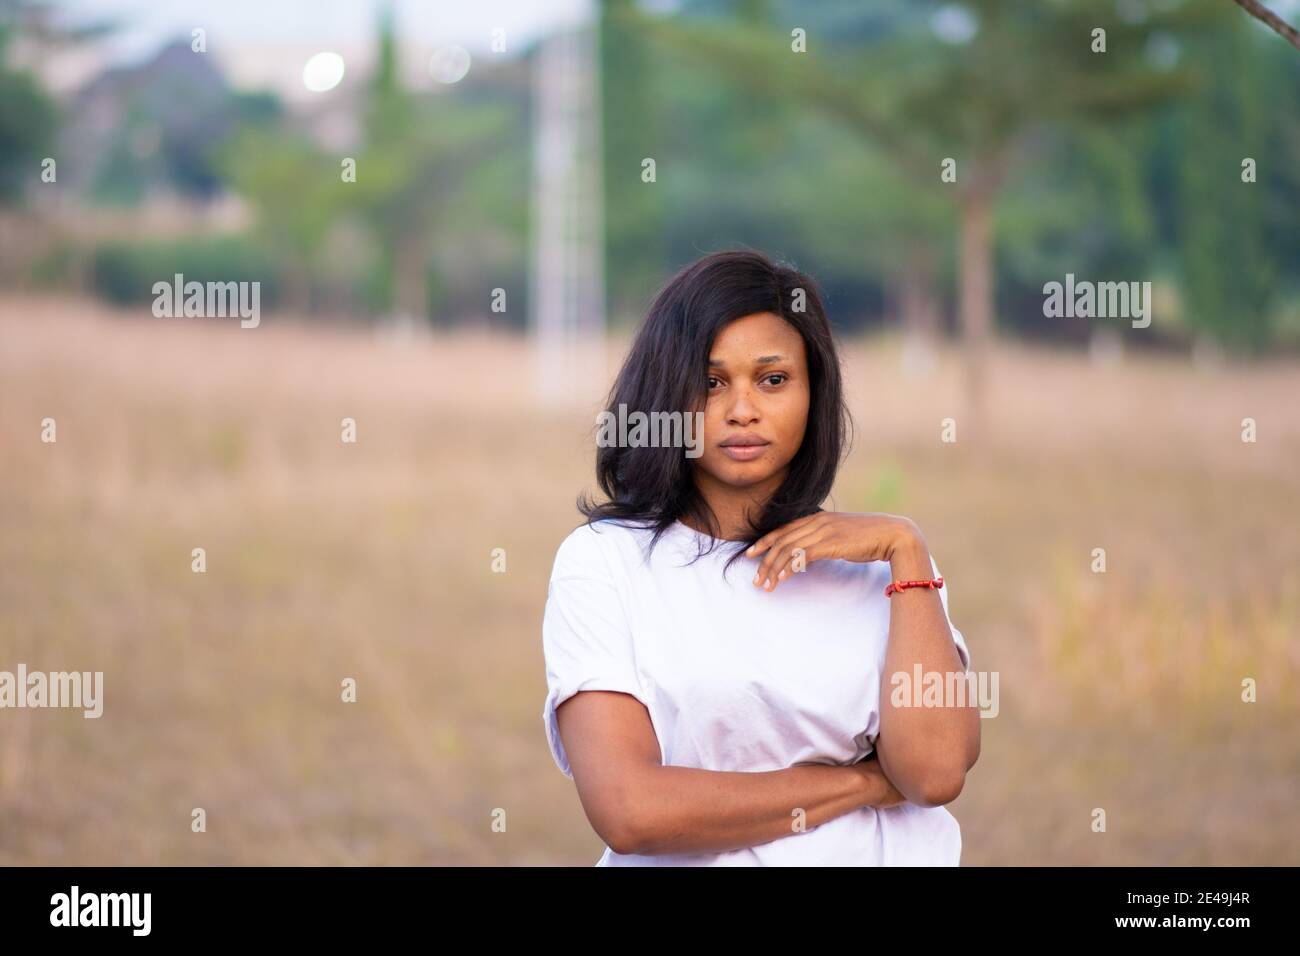 portrait of a young african woman standing in a park Stock Photo